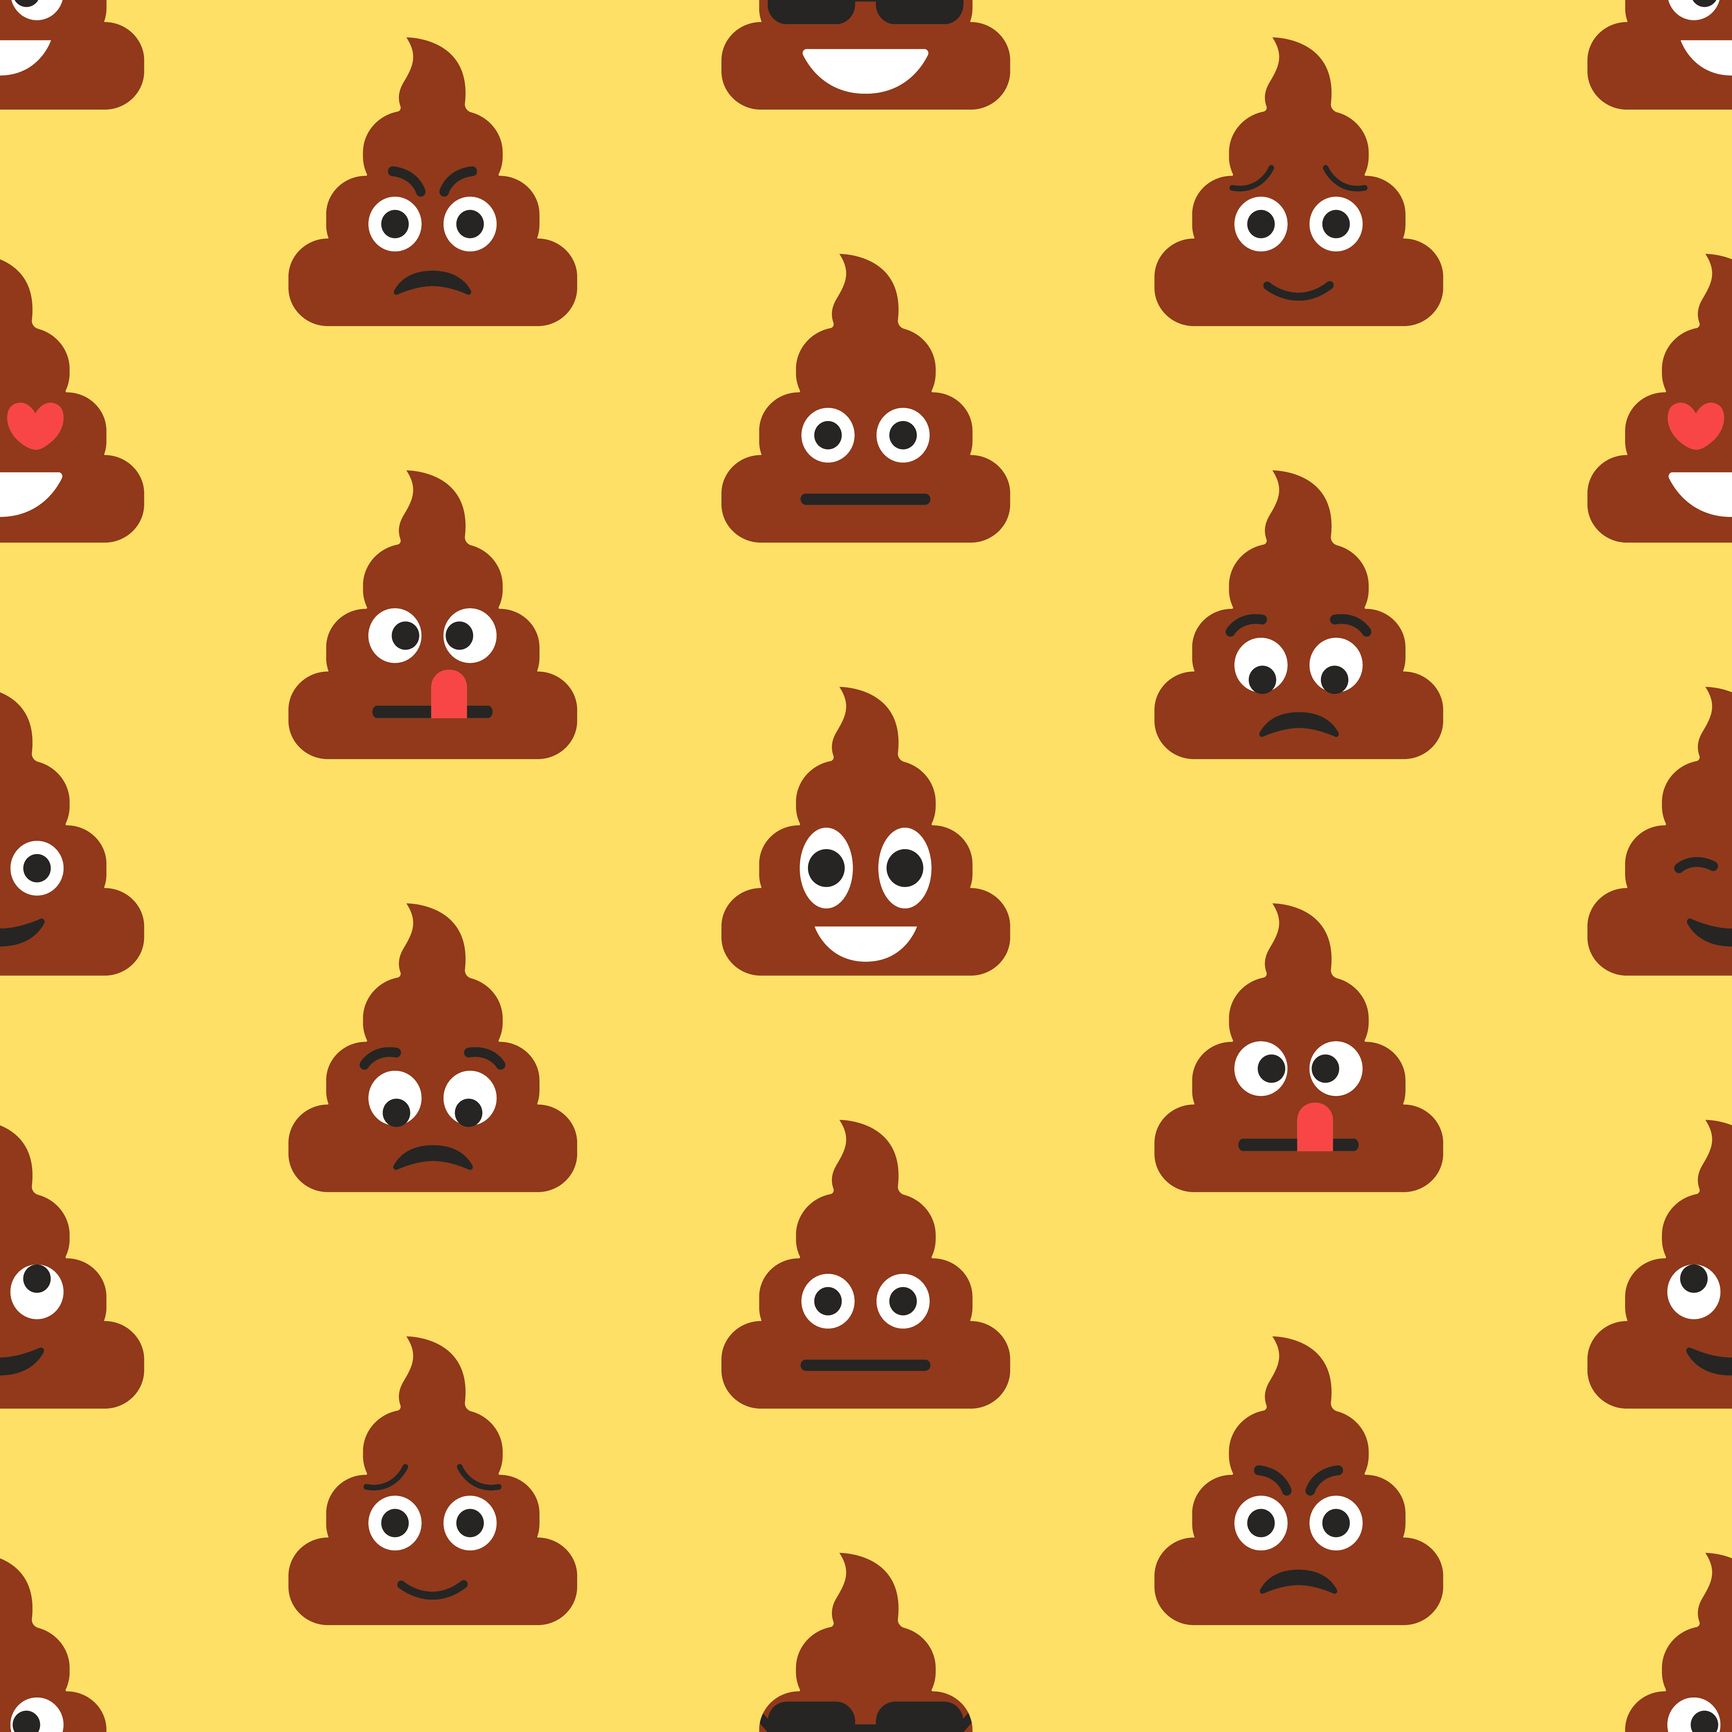 Your Poop Is Too Big to Come Out and Hurts. Now What?